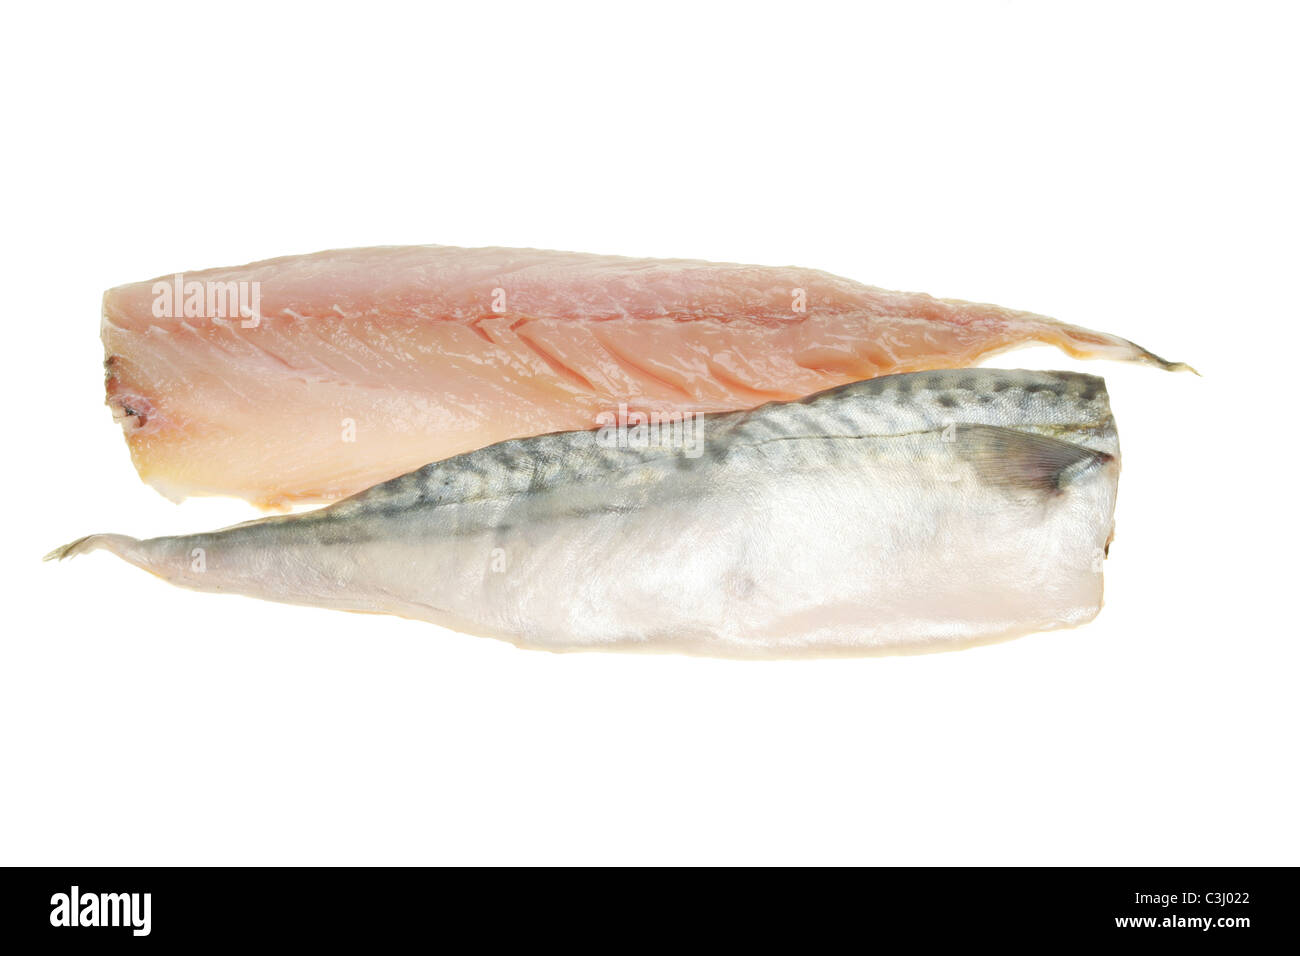 Two mackerel fish fillets isolated on white Stock Photo